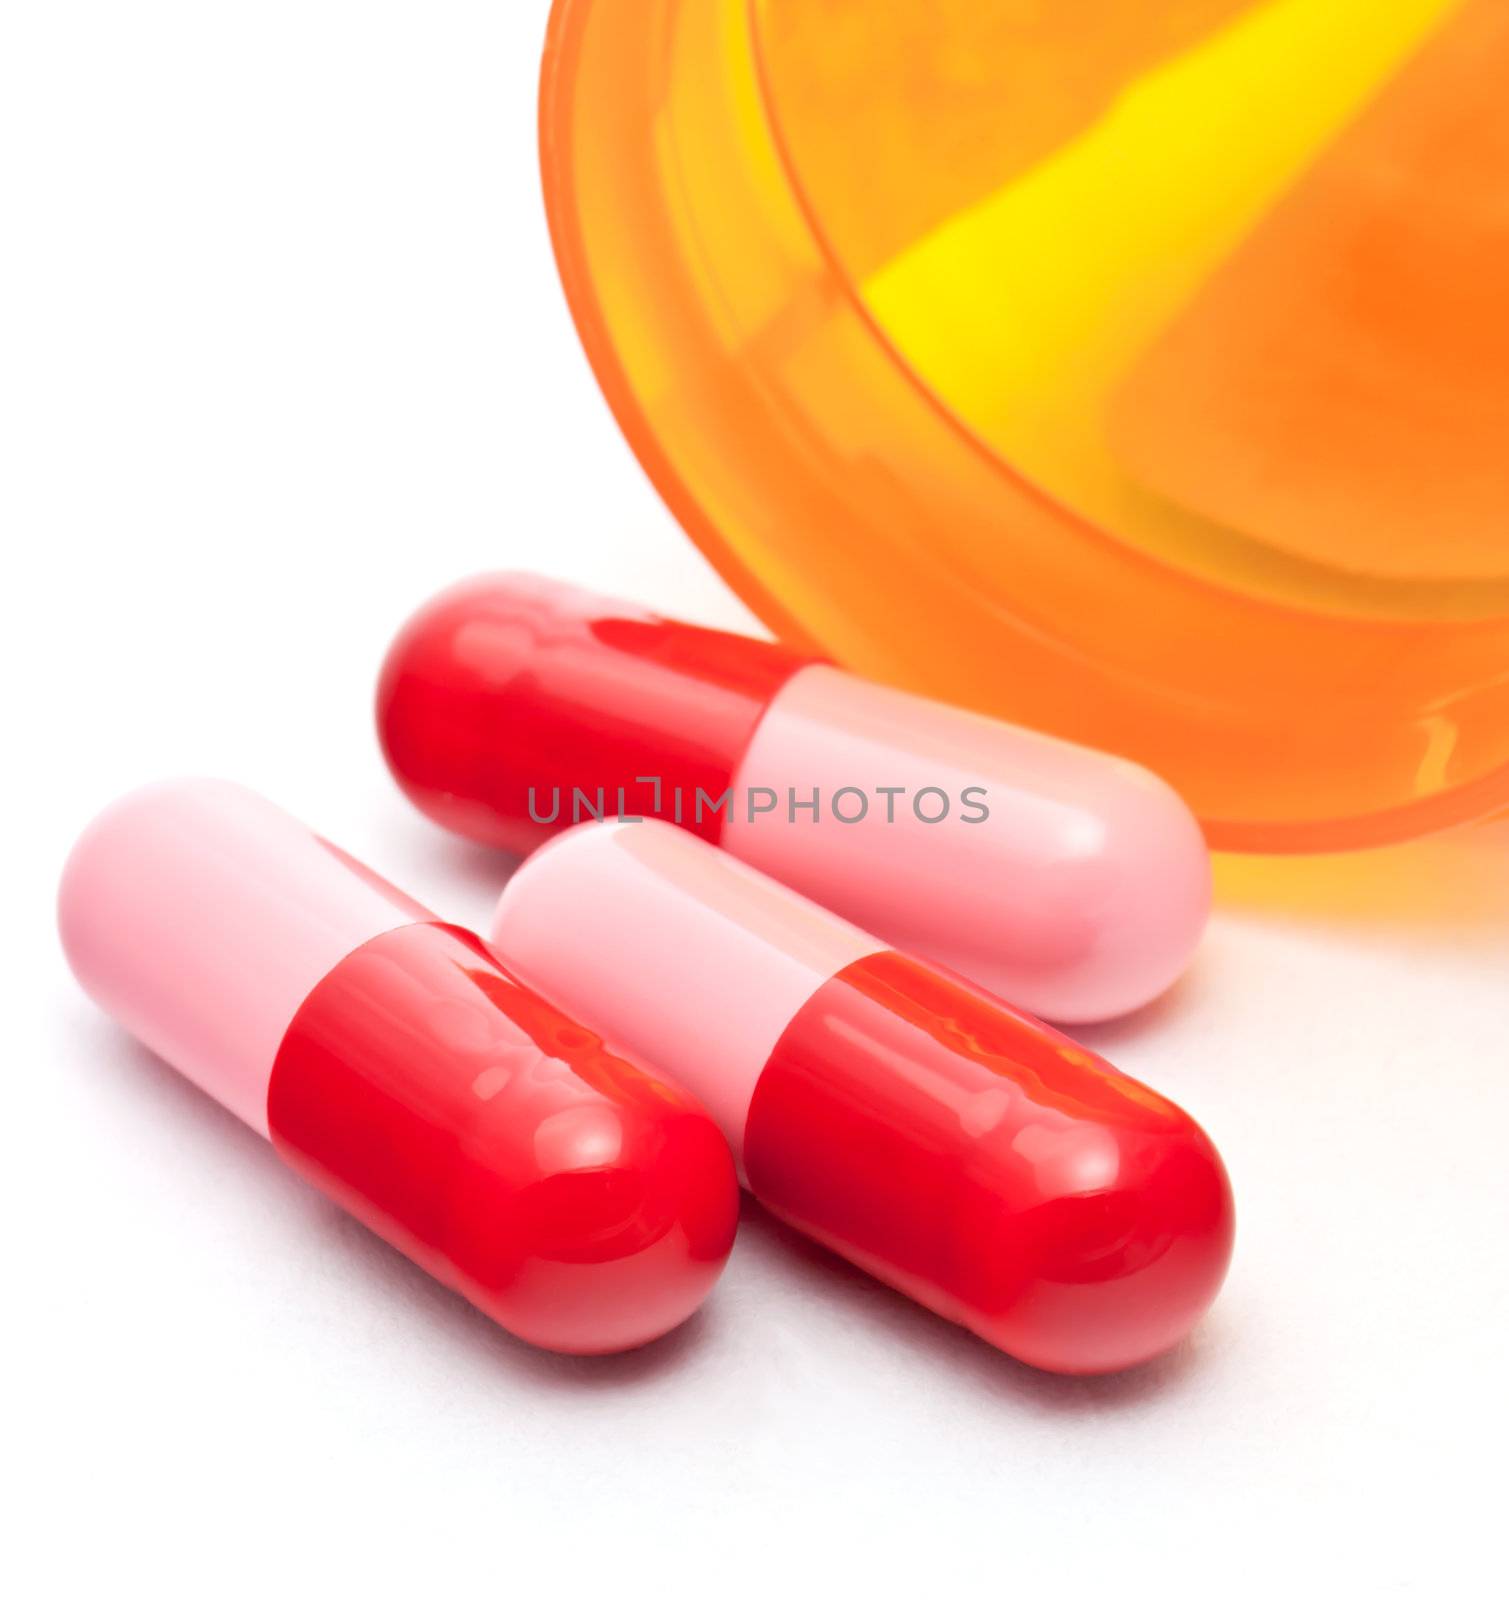 Red and pink capsules  by melpomene